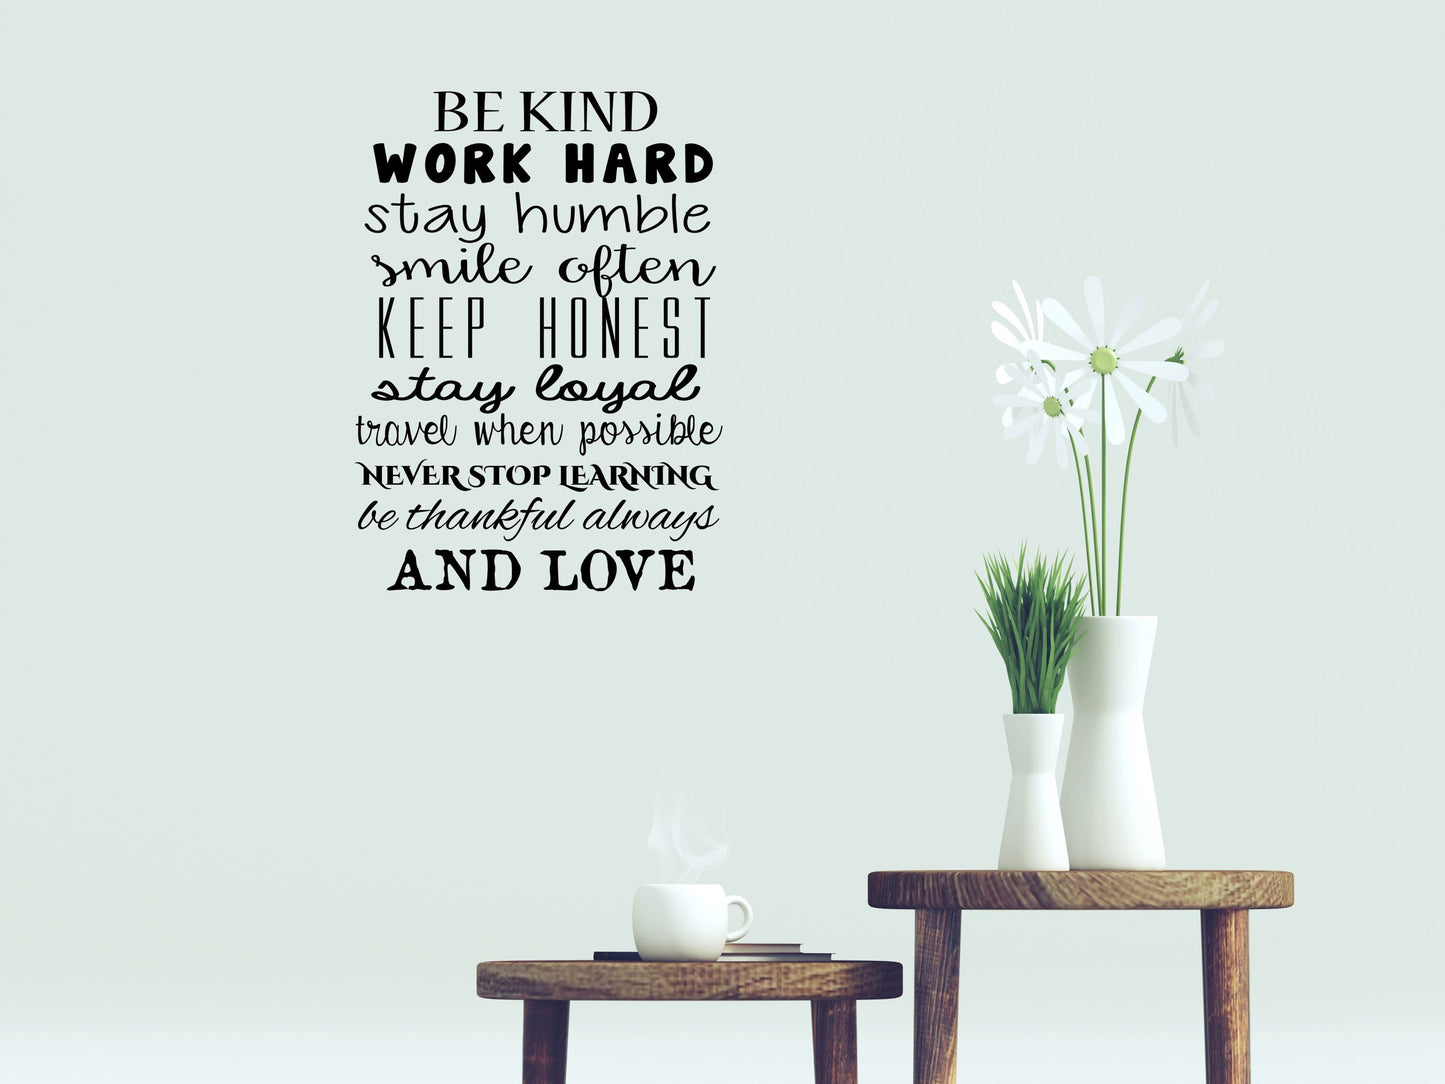 Be Kind Work Hard Word Wall Art Quote Decal Vinyl Wall Decal Done 